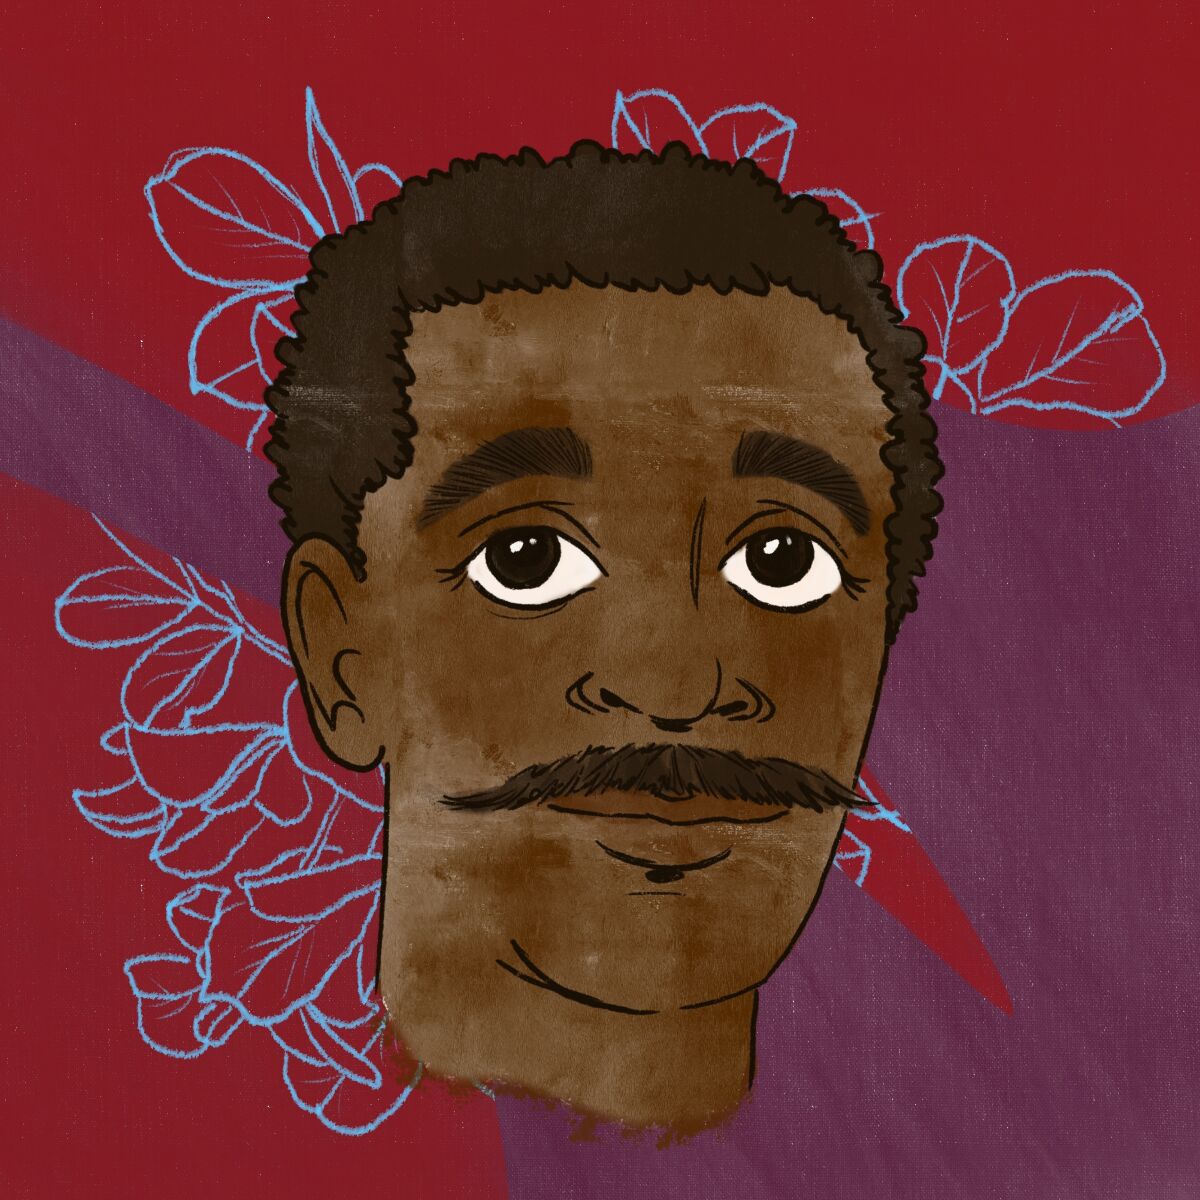 An illustration of George Washington Carver on a maroon background with blue flowers 